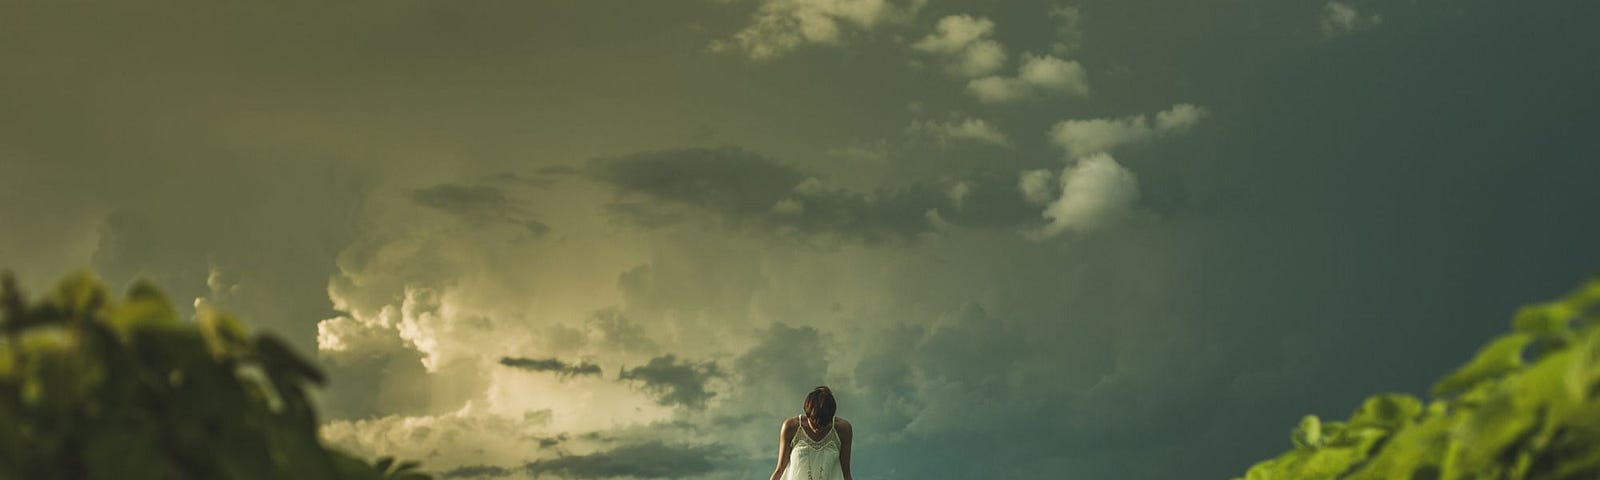 Picture of femme person in white dress with their head looking down, standing in greenery, swirling clouds behind them